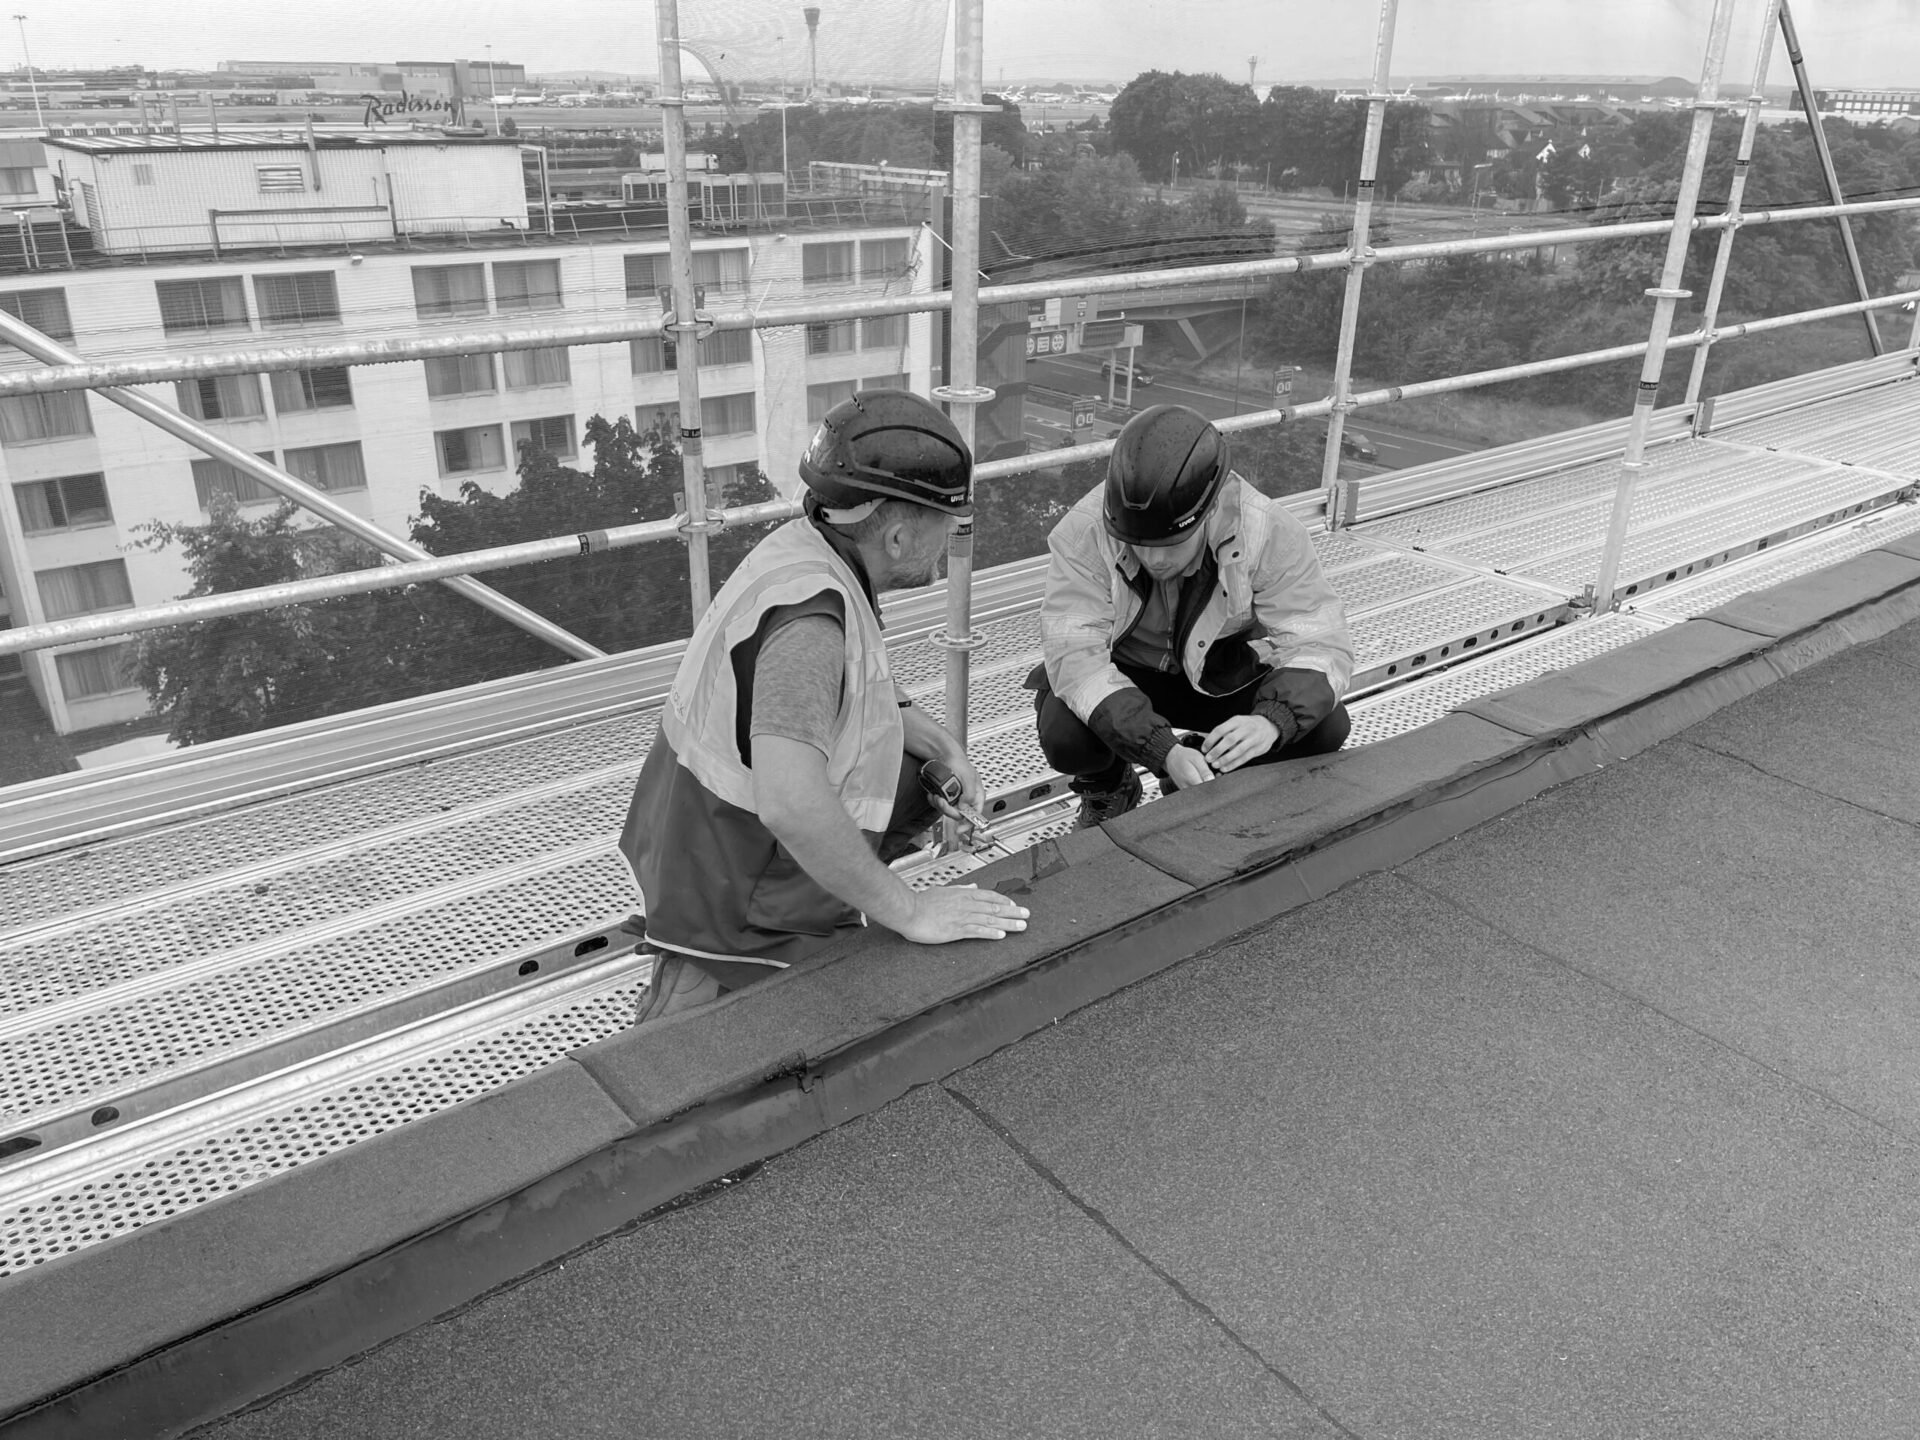 A photo of 2 construction workers working on a roof.